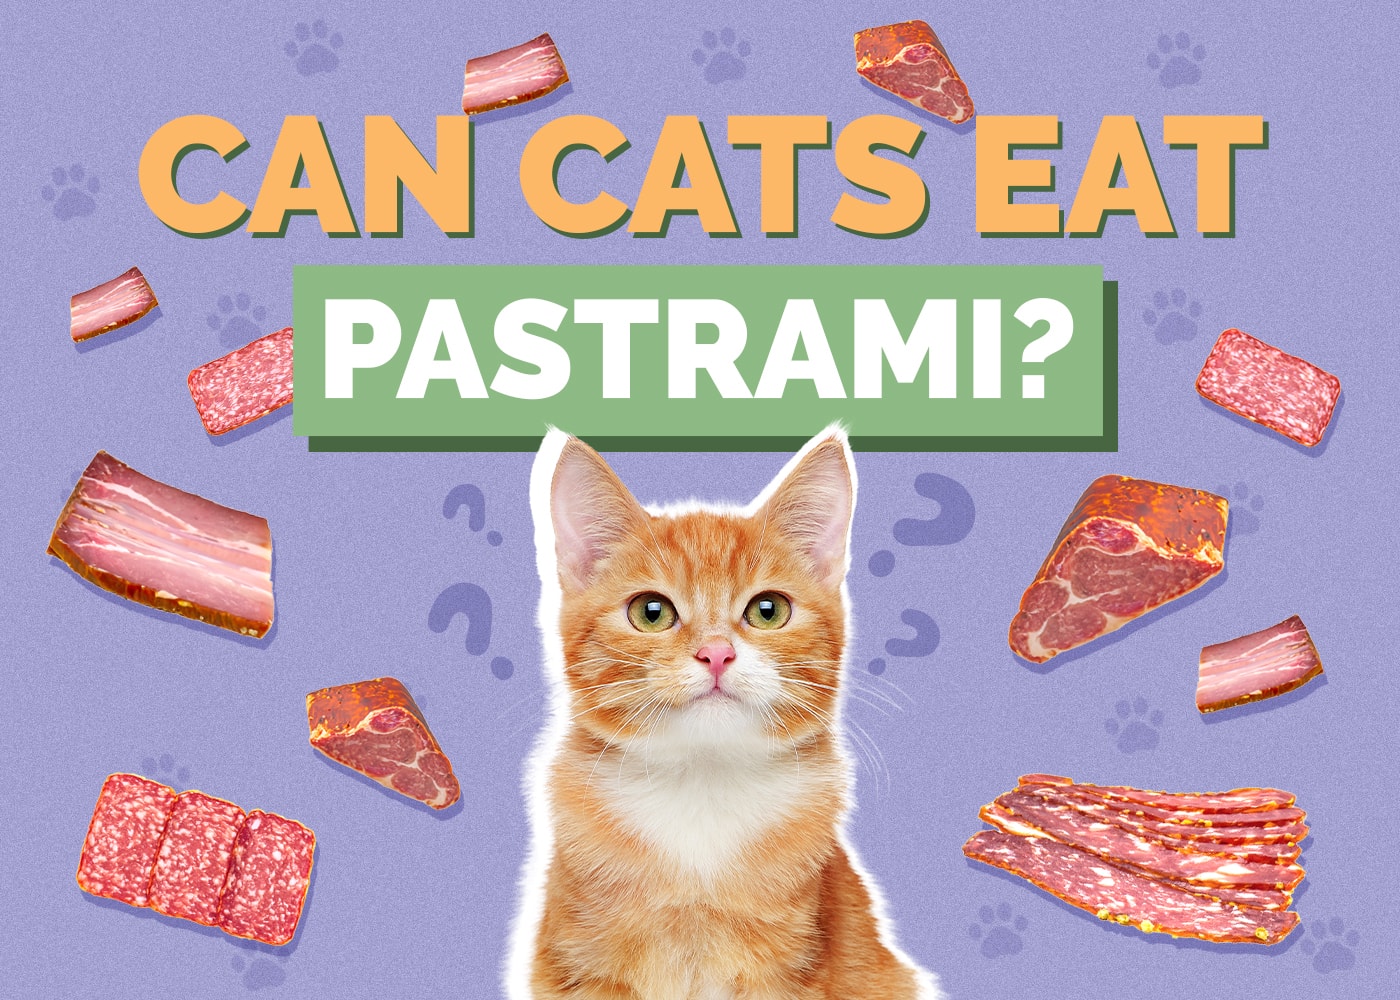 Can Cats Eat pastrami